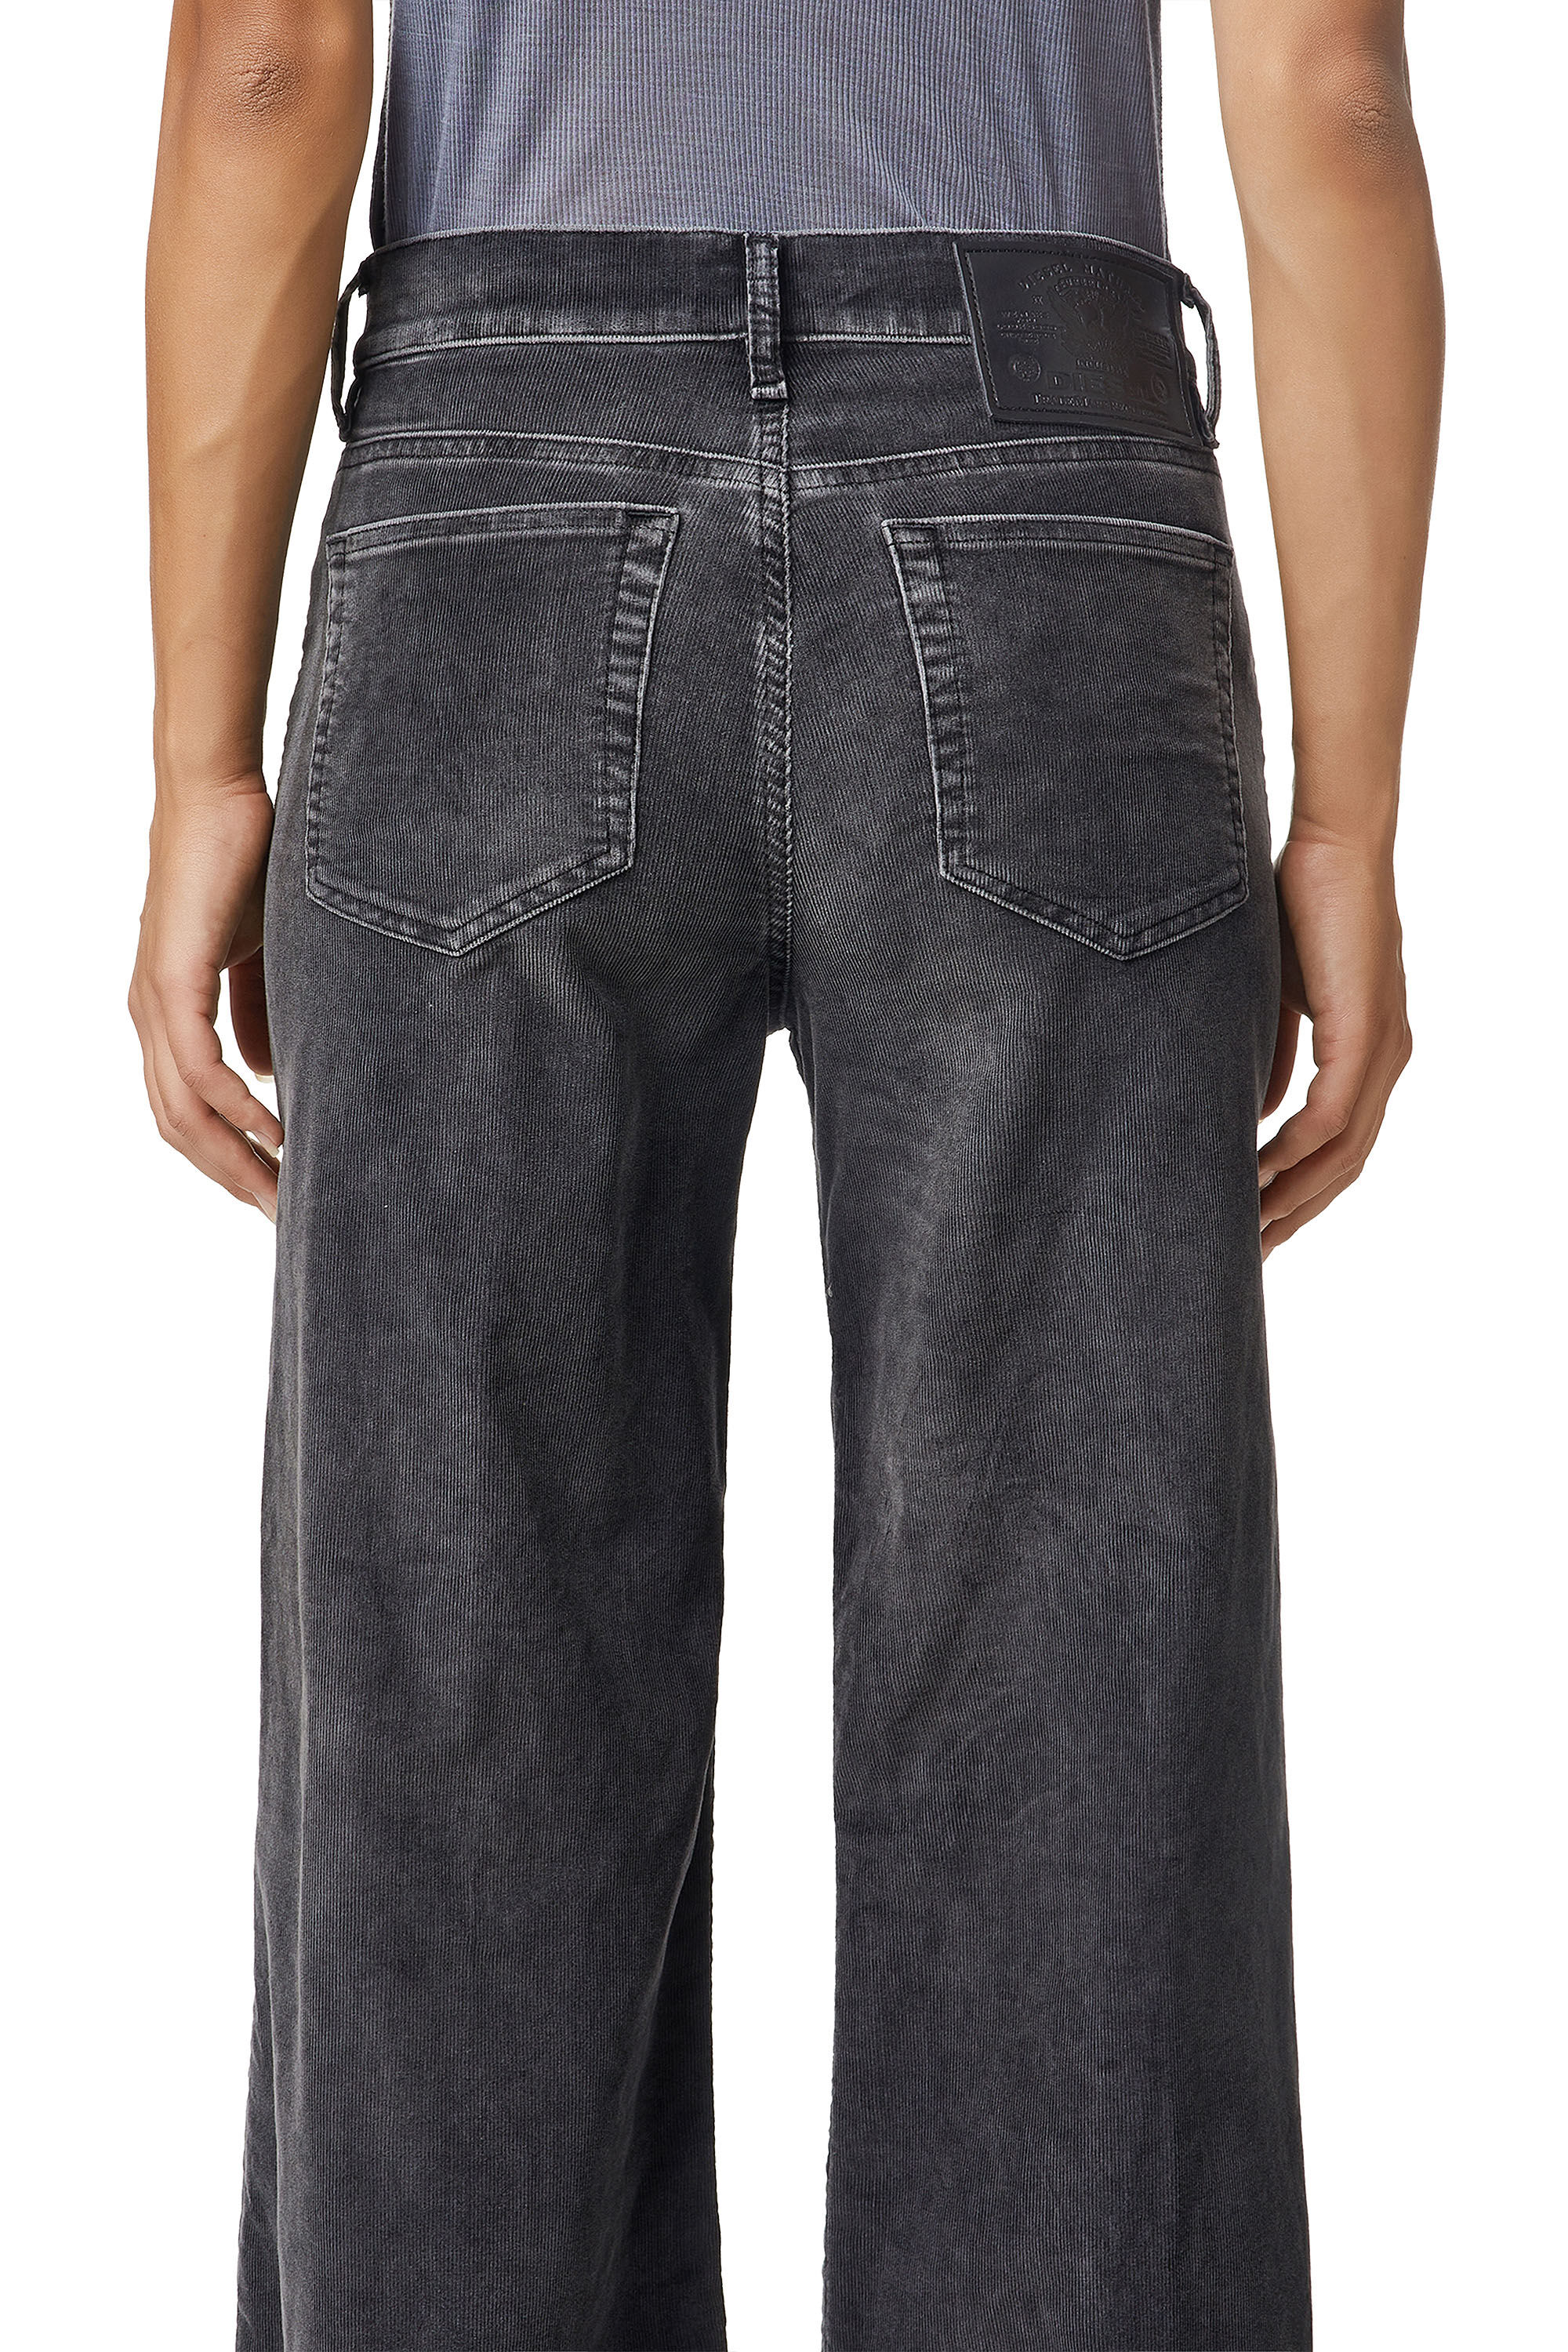 Diesel - D-Akemi 069YA Bootcut and Flare Jeans,  - Image 6